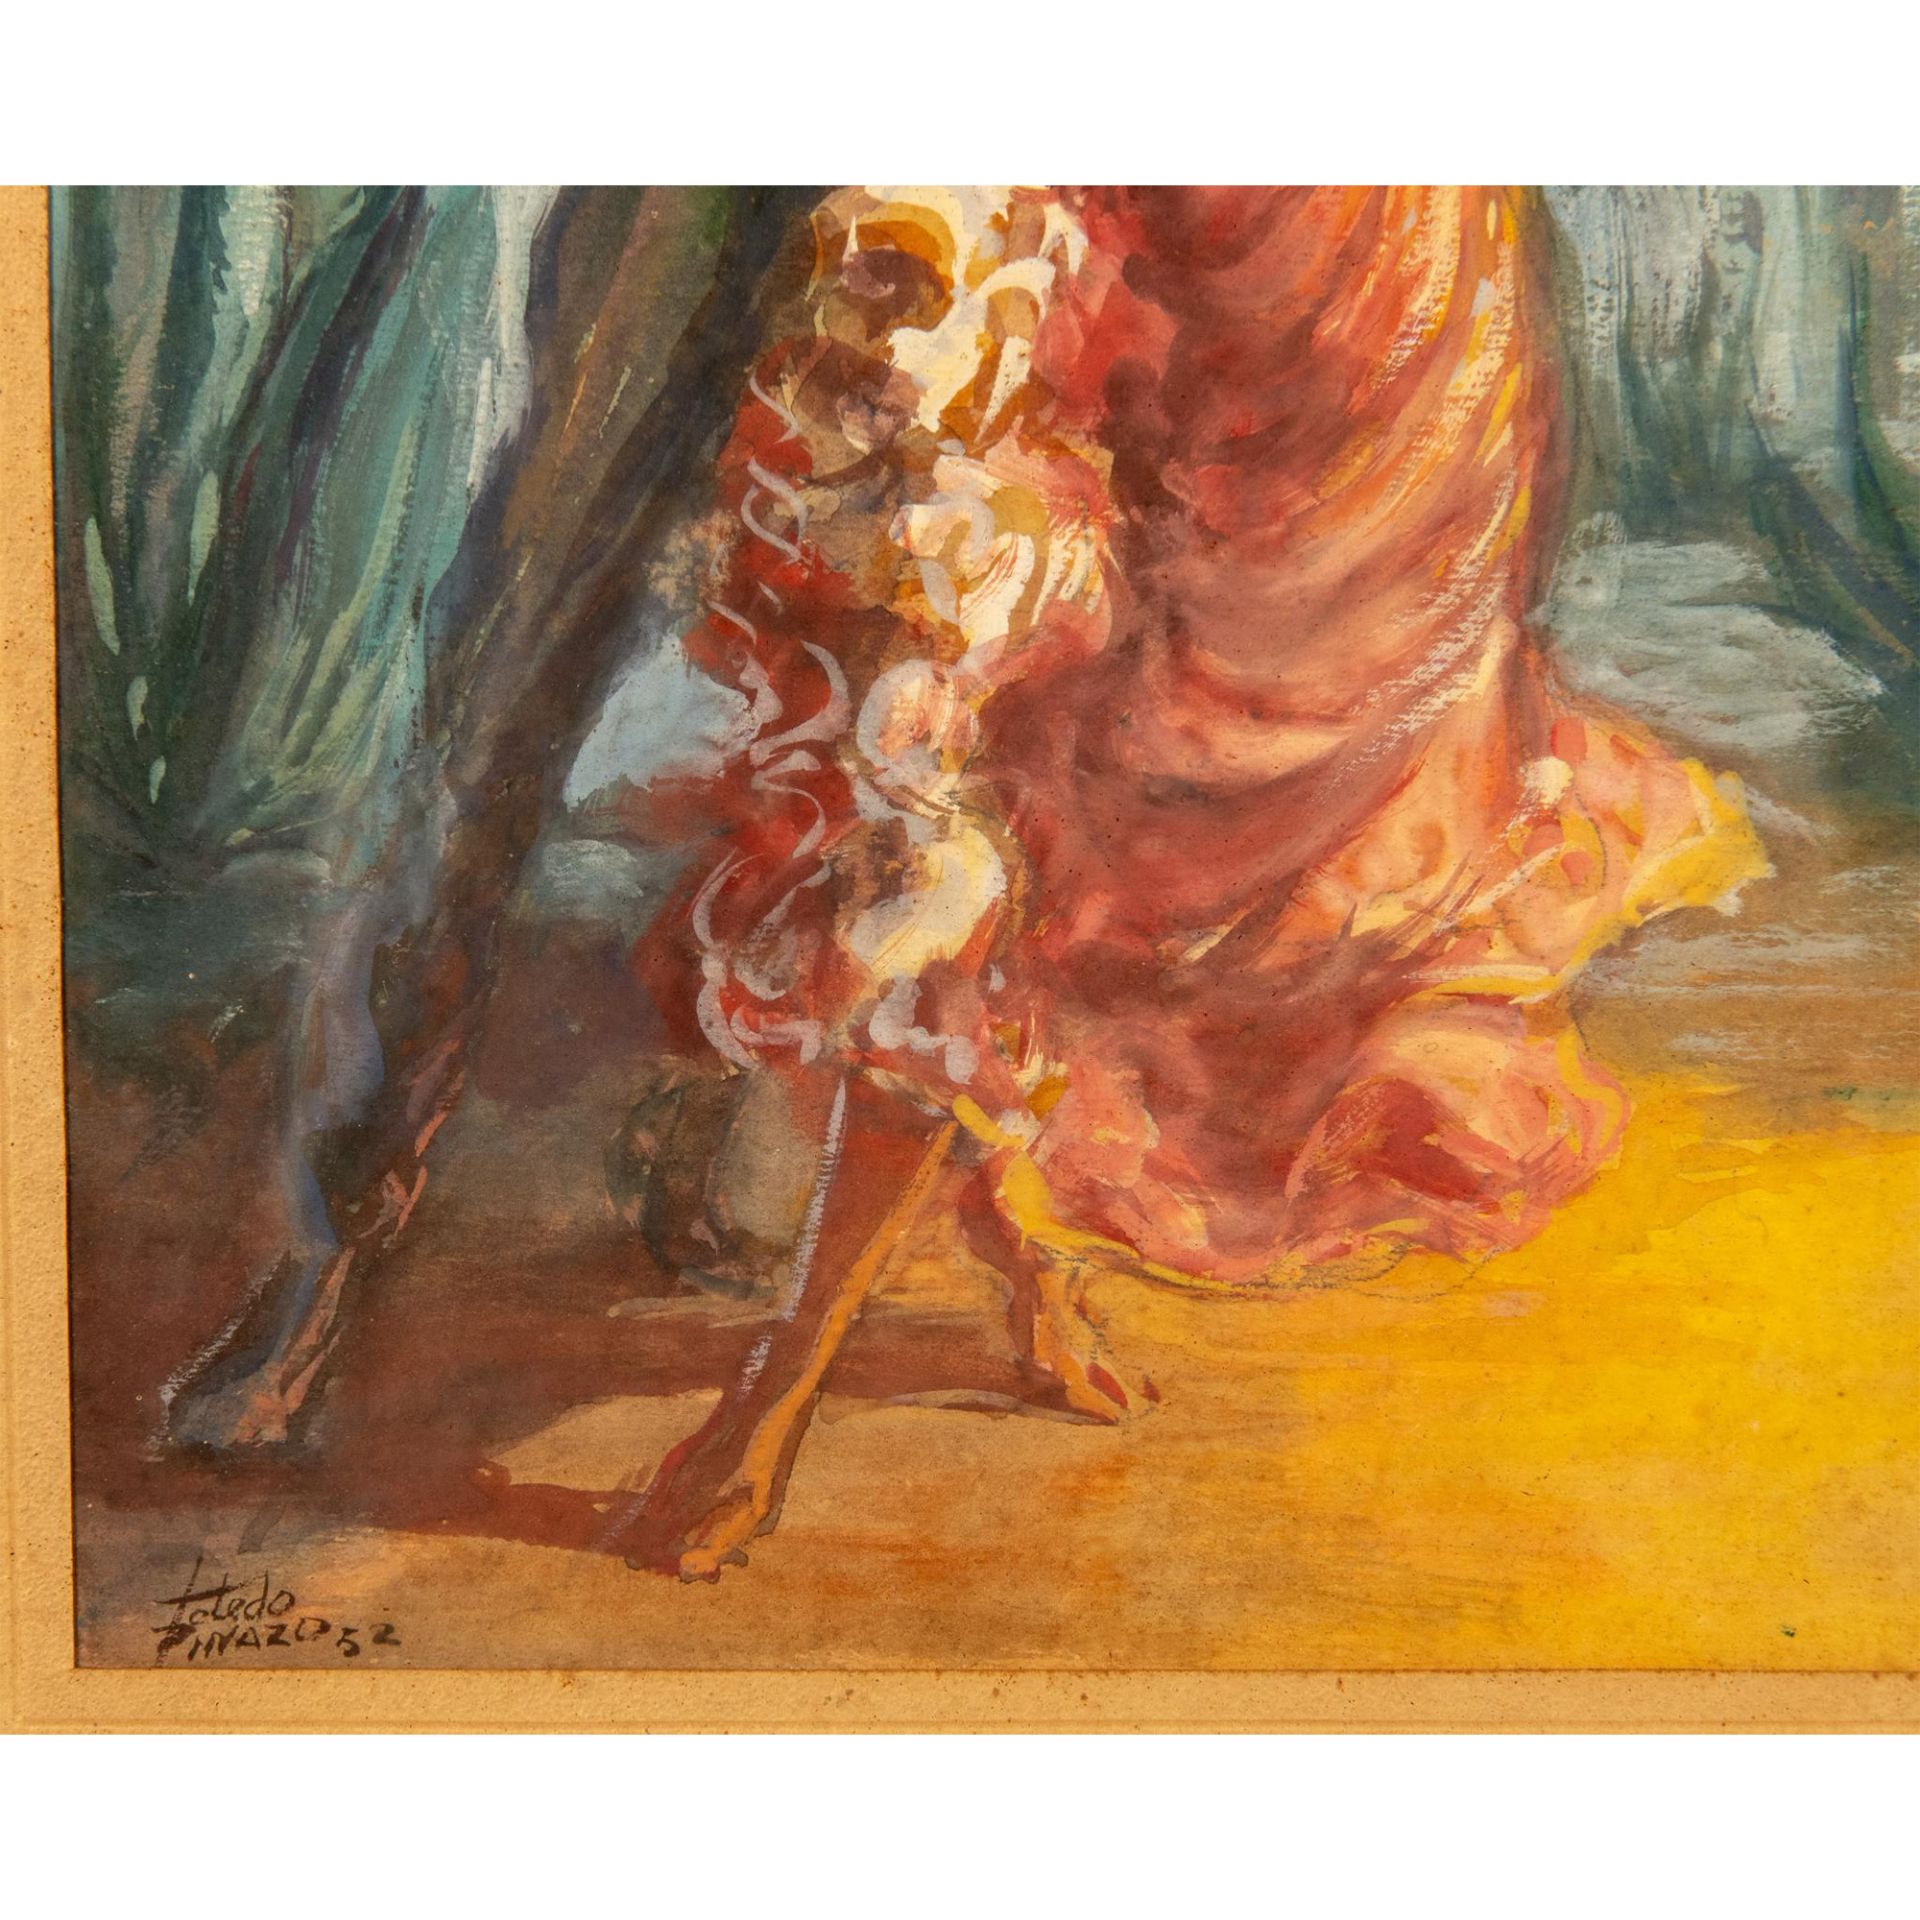 Original Watercolor and Gouache on Paper, Flamenco, Signed - Image 4 of 5